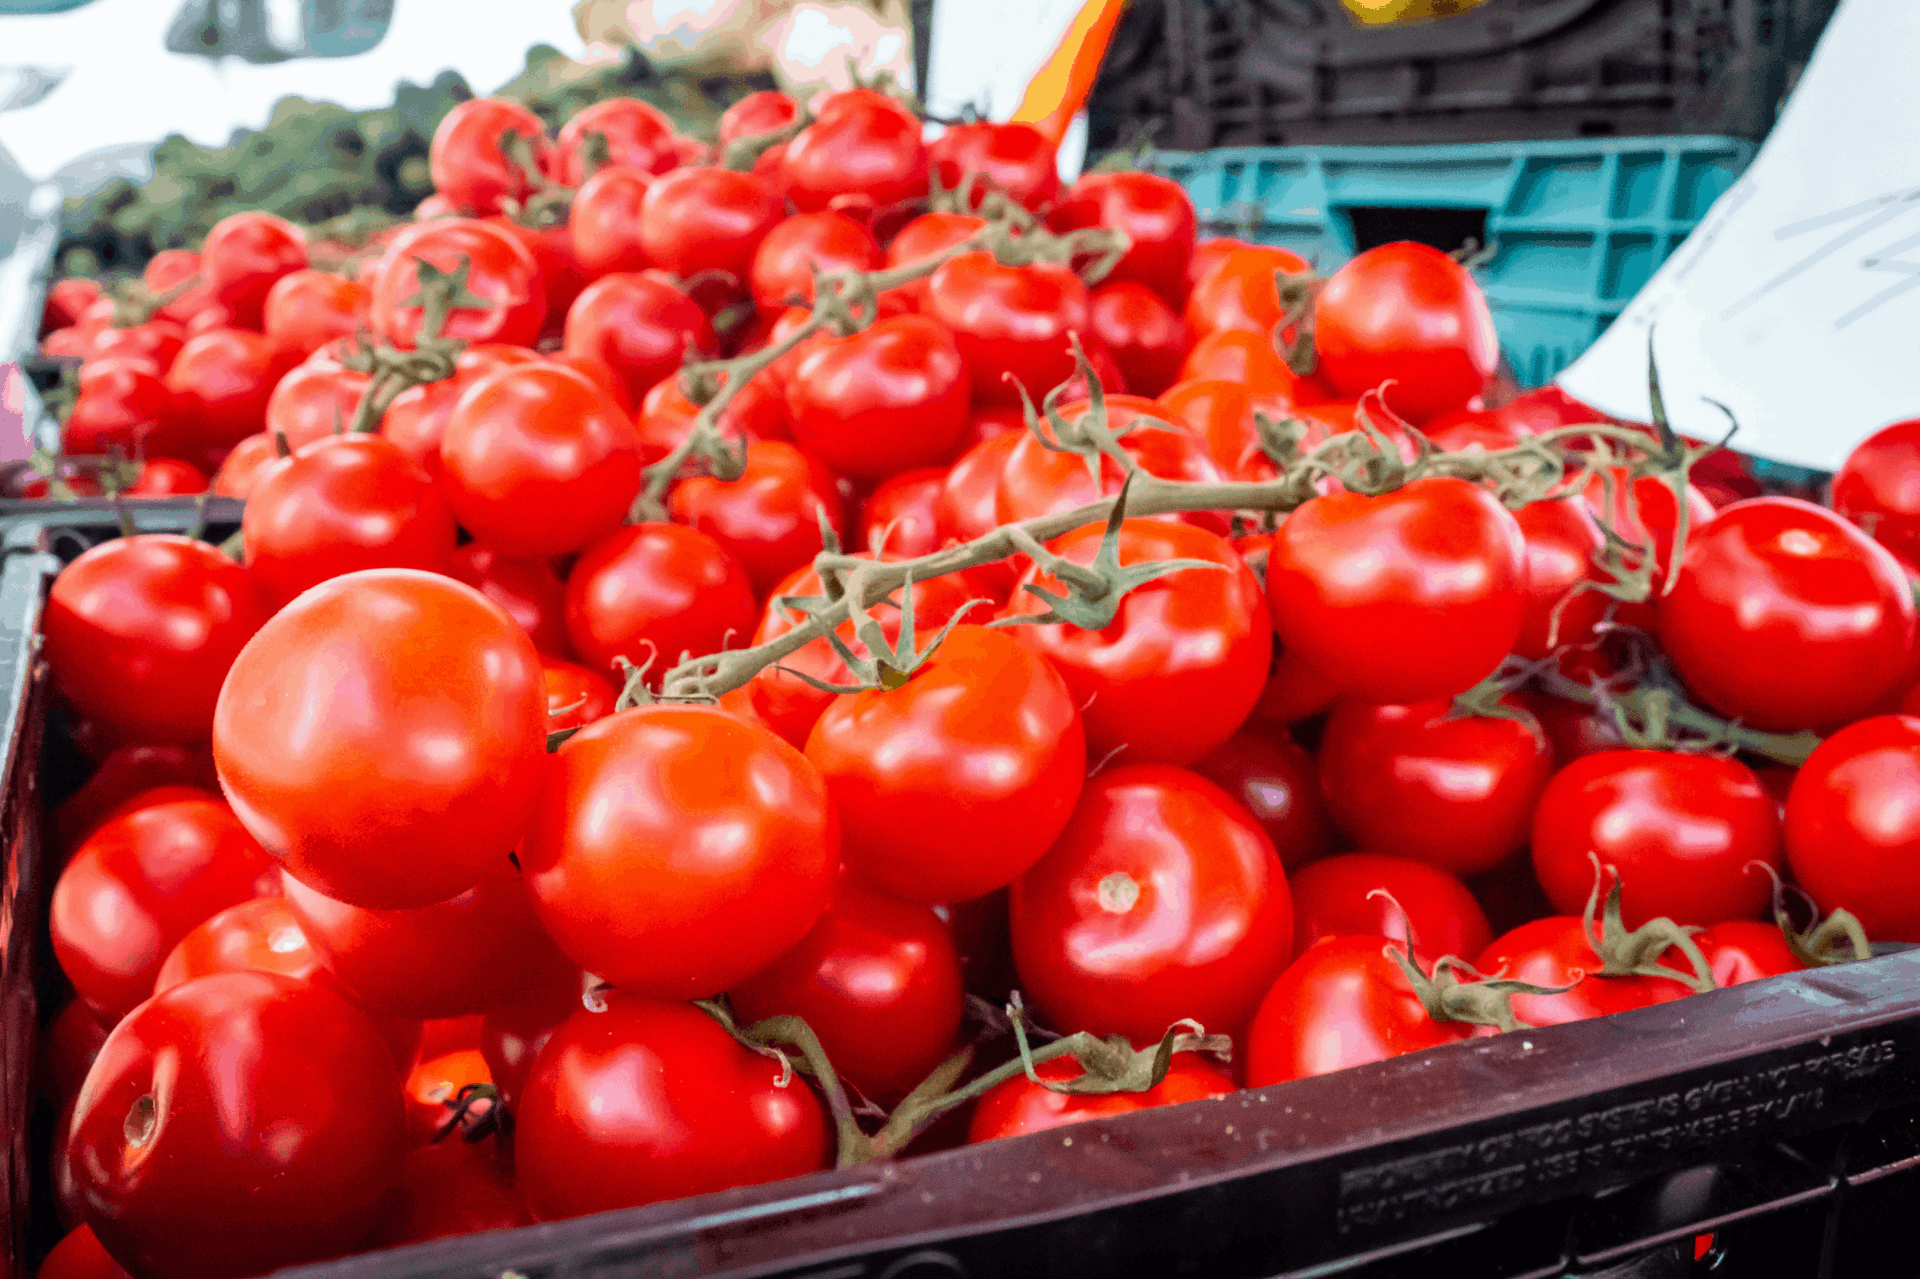 image of tomatoes being sold at a farmers market